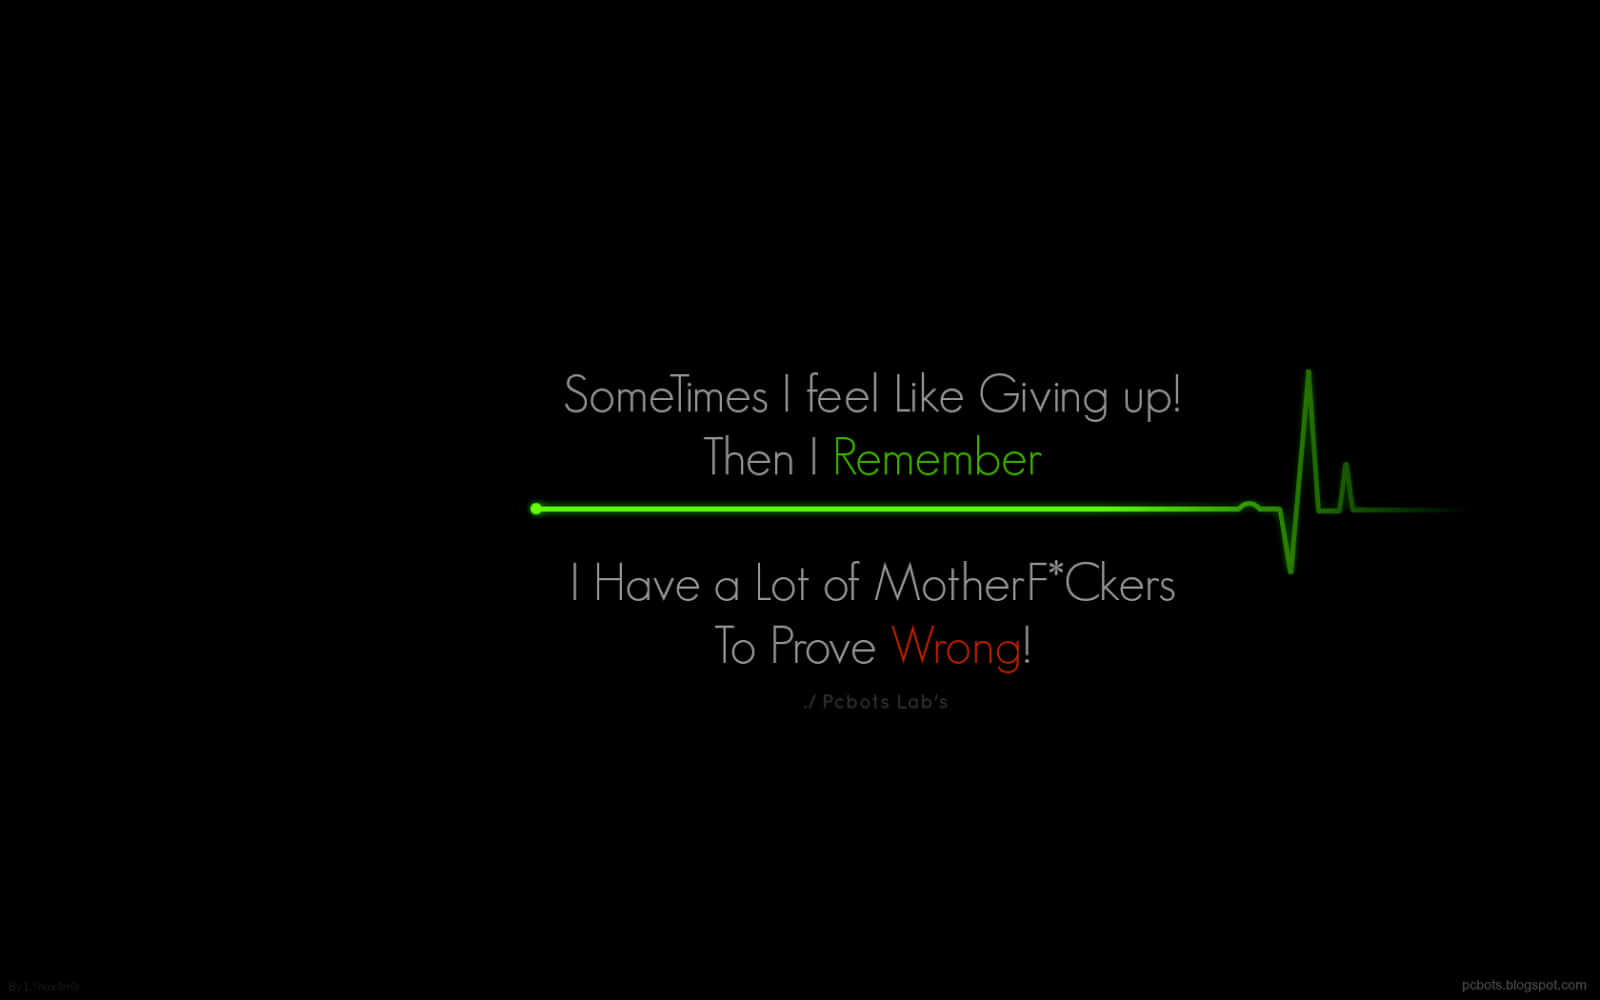 Sure Proving Wrong Quote Wallpaper Background